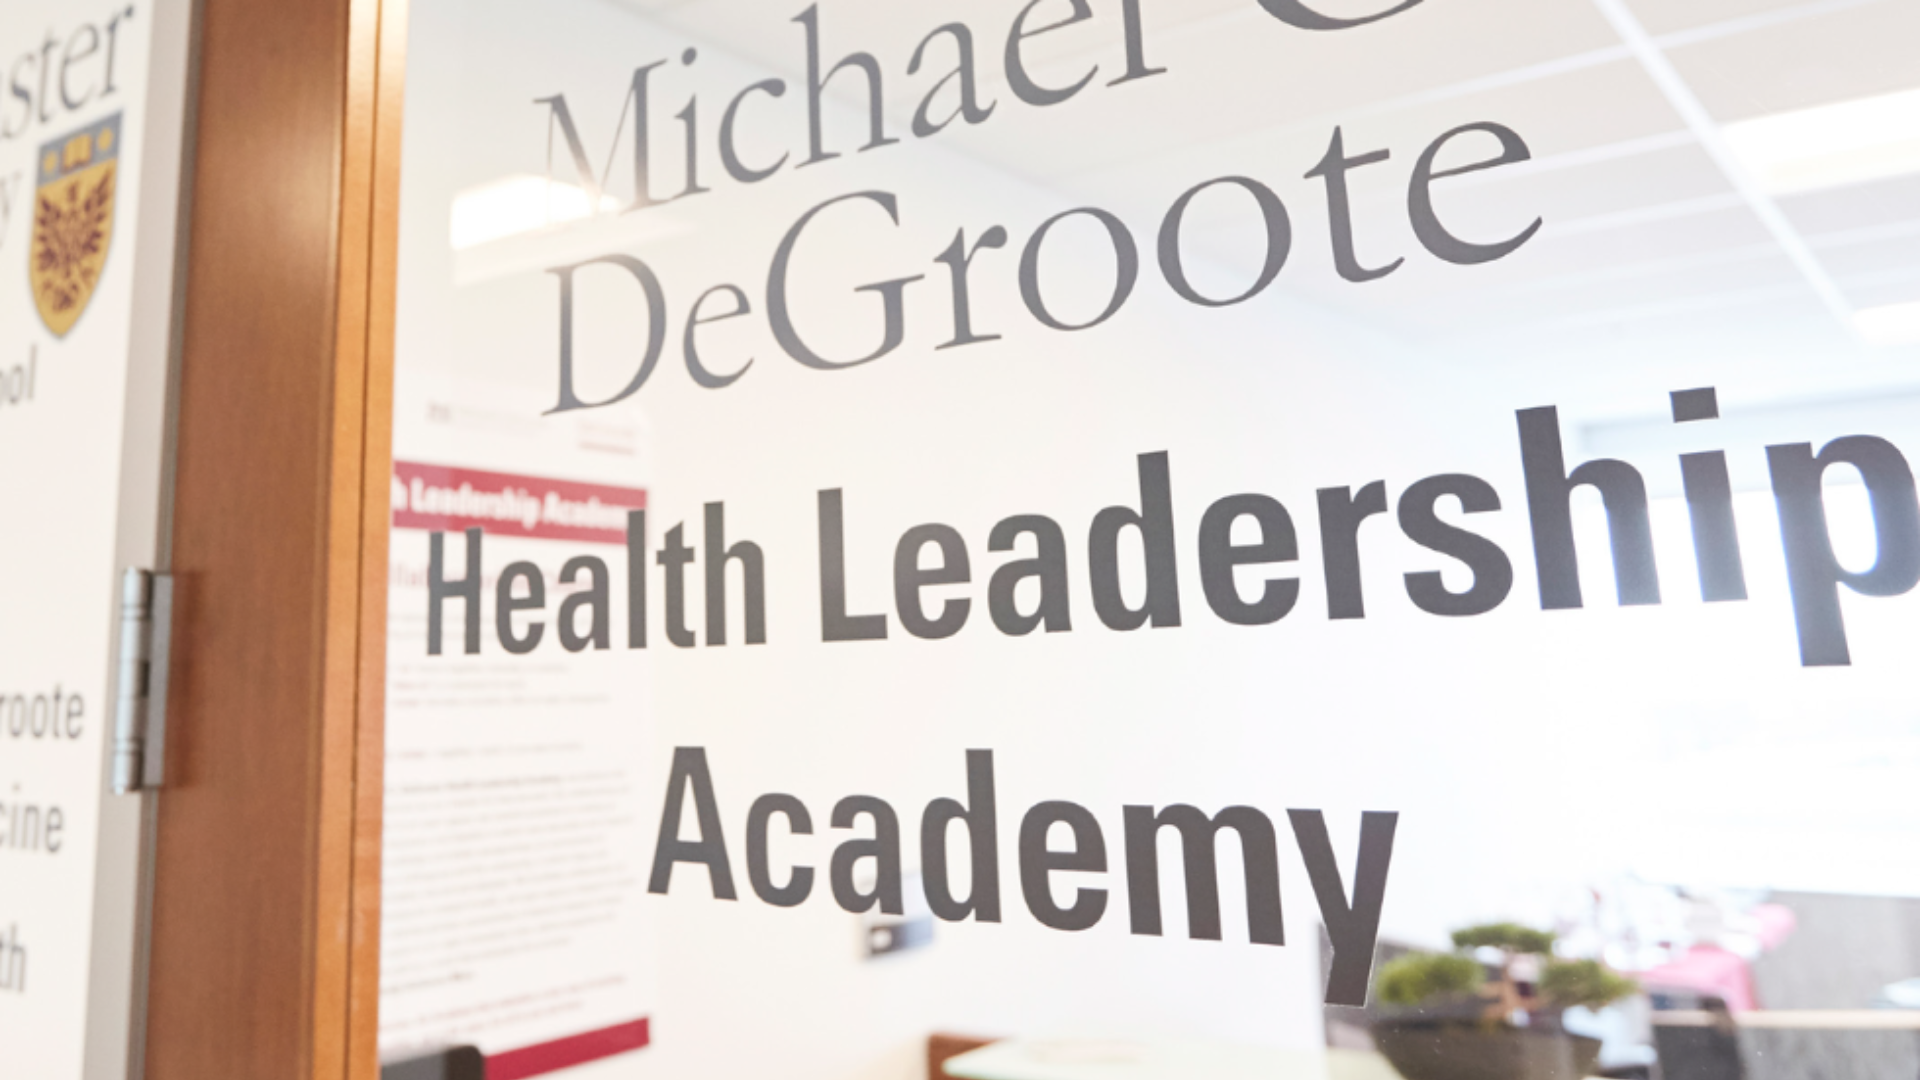 McMaster Health Leadership Academy on Mission to Transform National Health Care